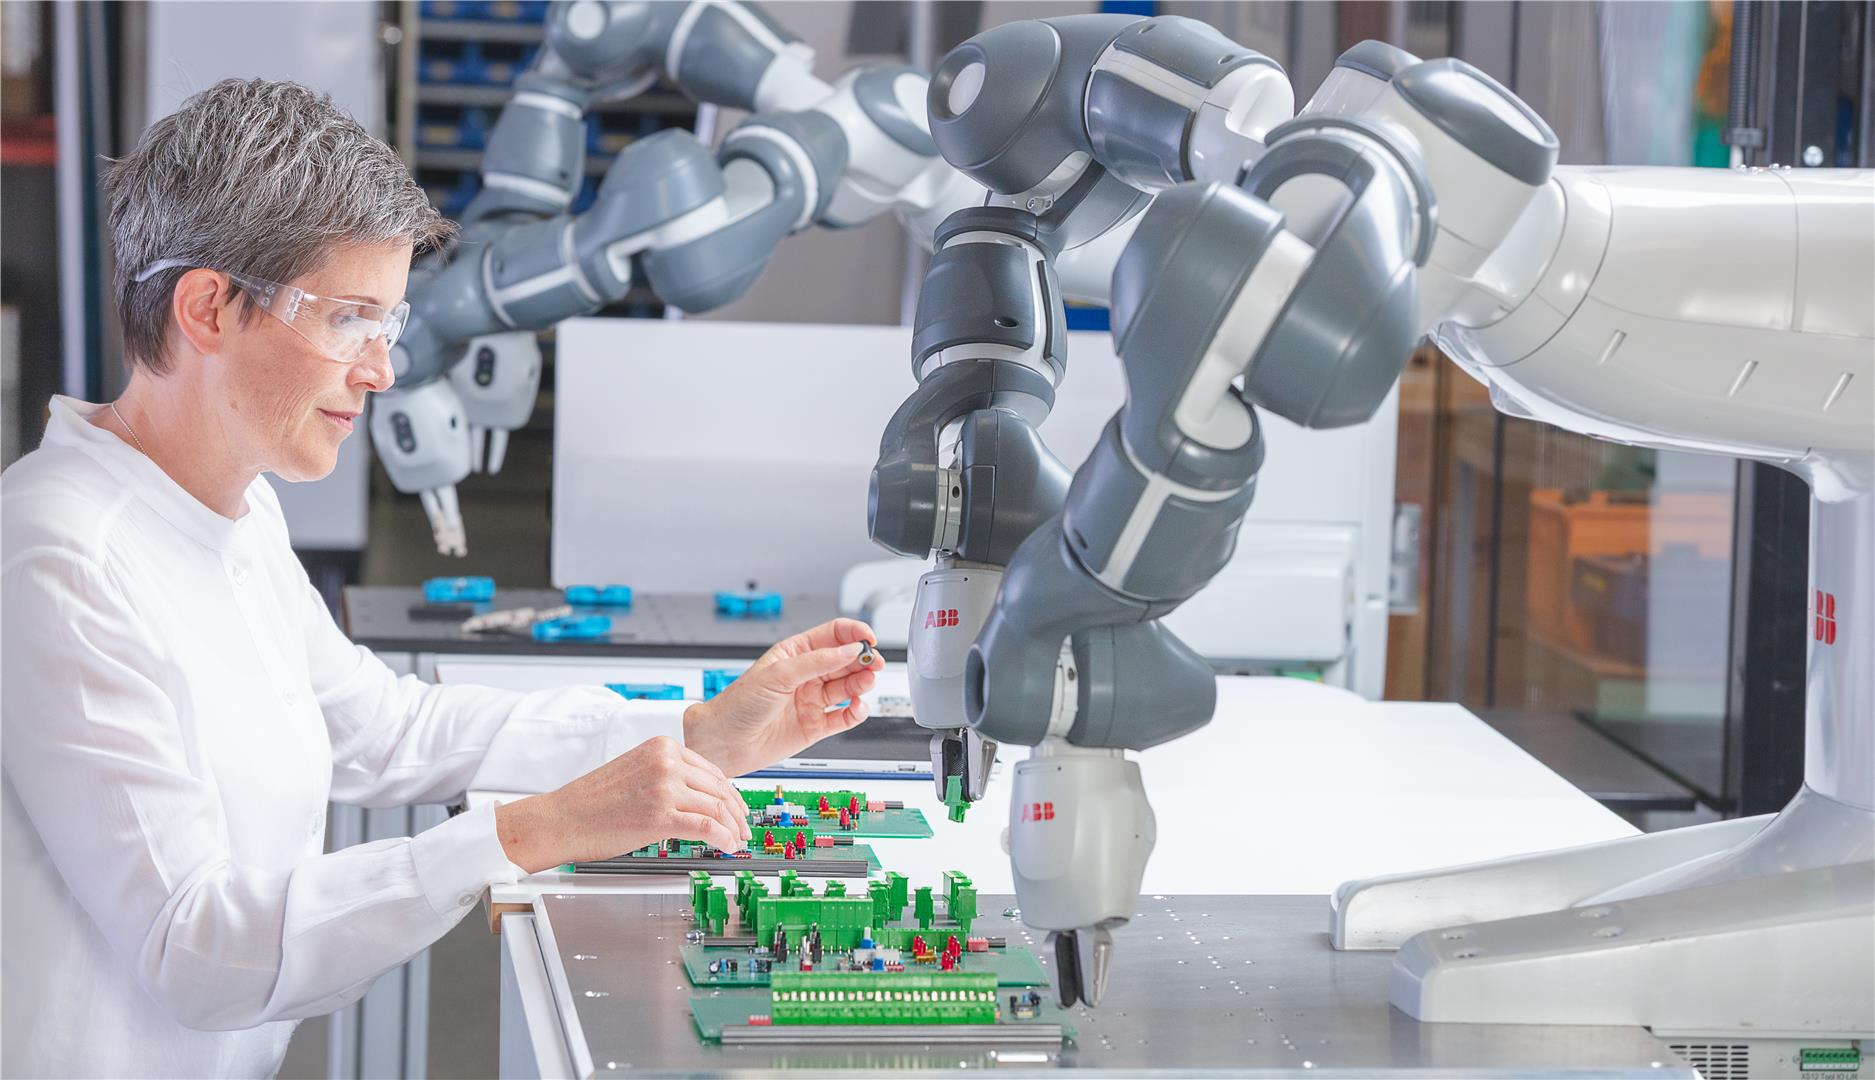 The YuMi 1400 is capable of performing a number of precision tasks (pictured). Photo via ABB Robotics.